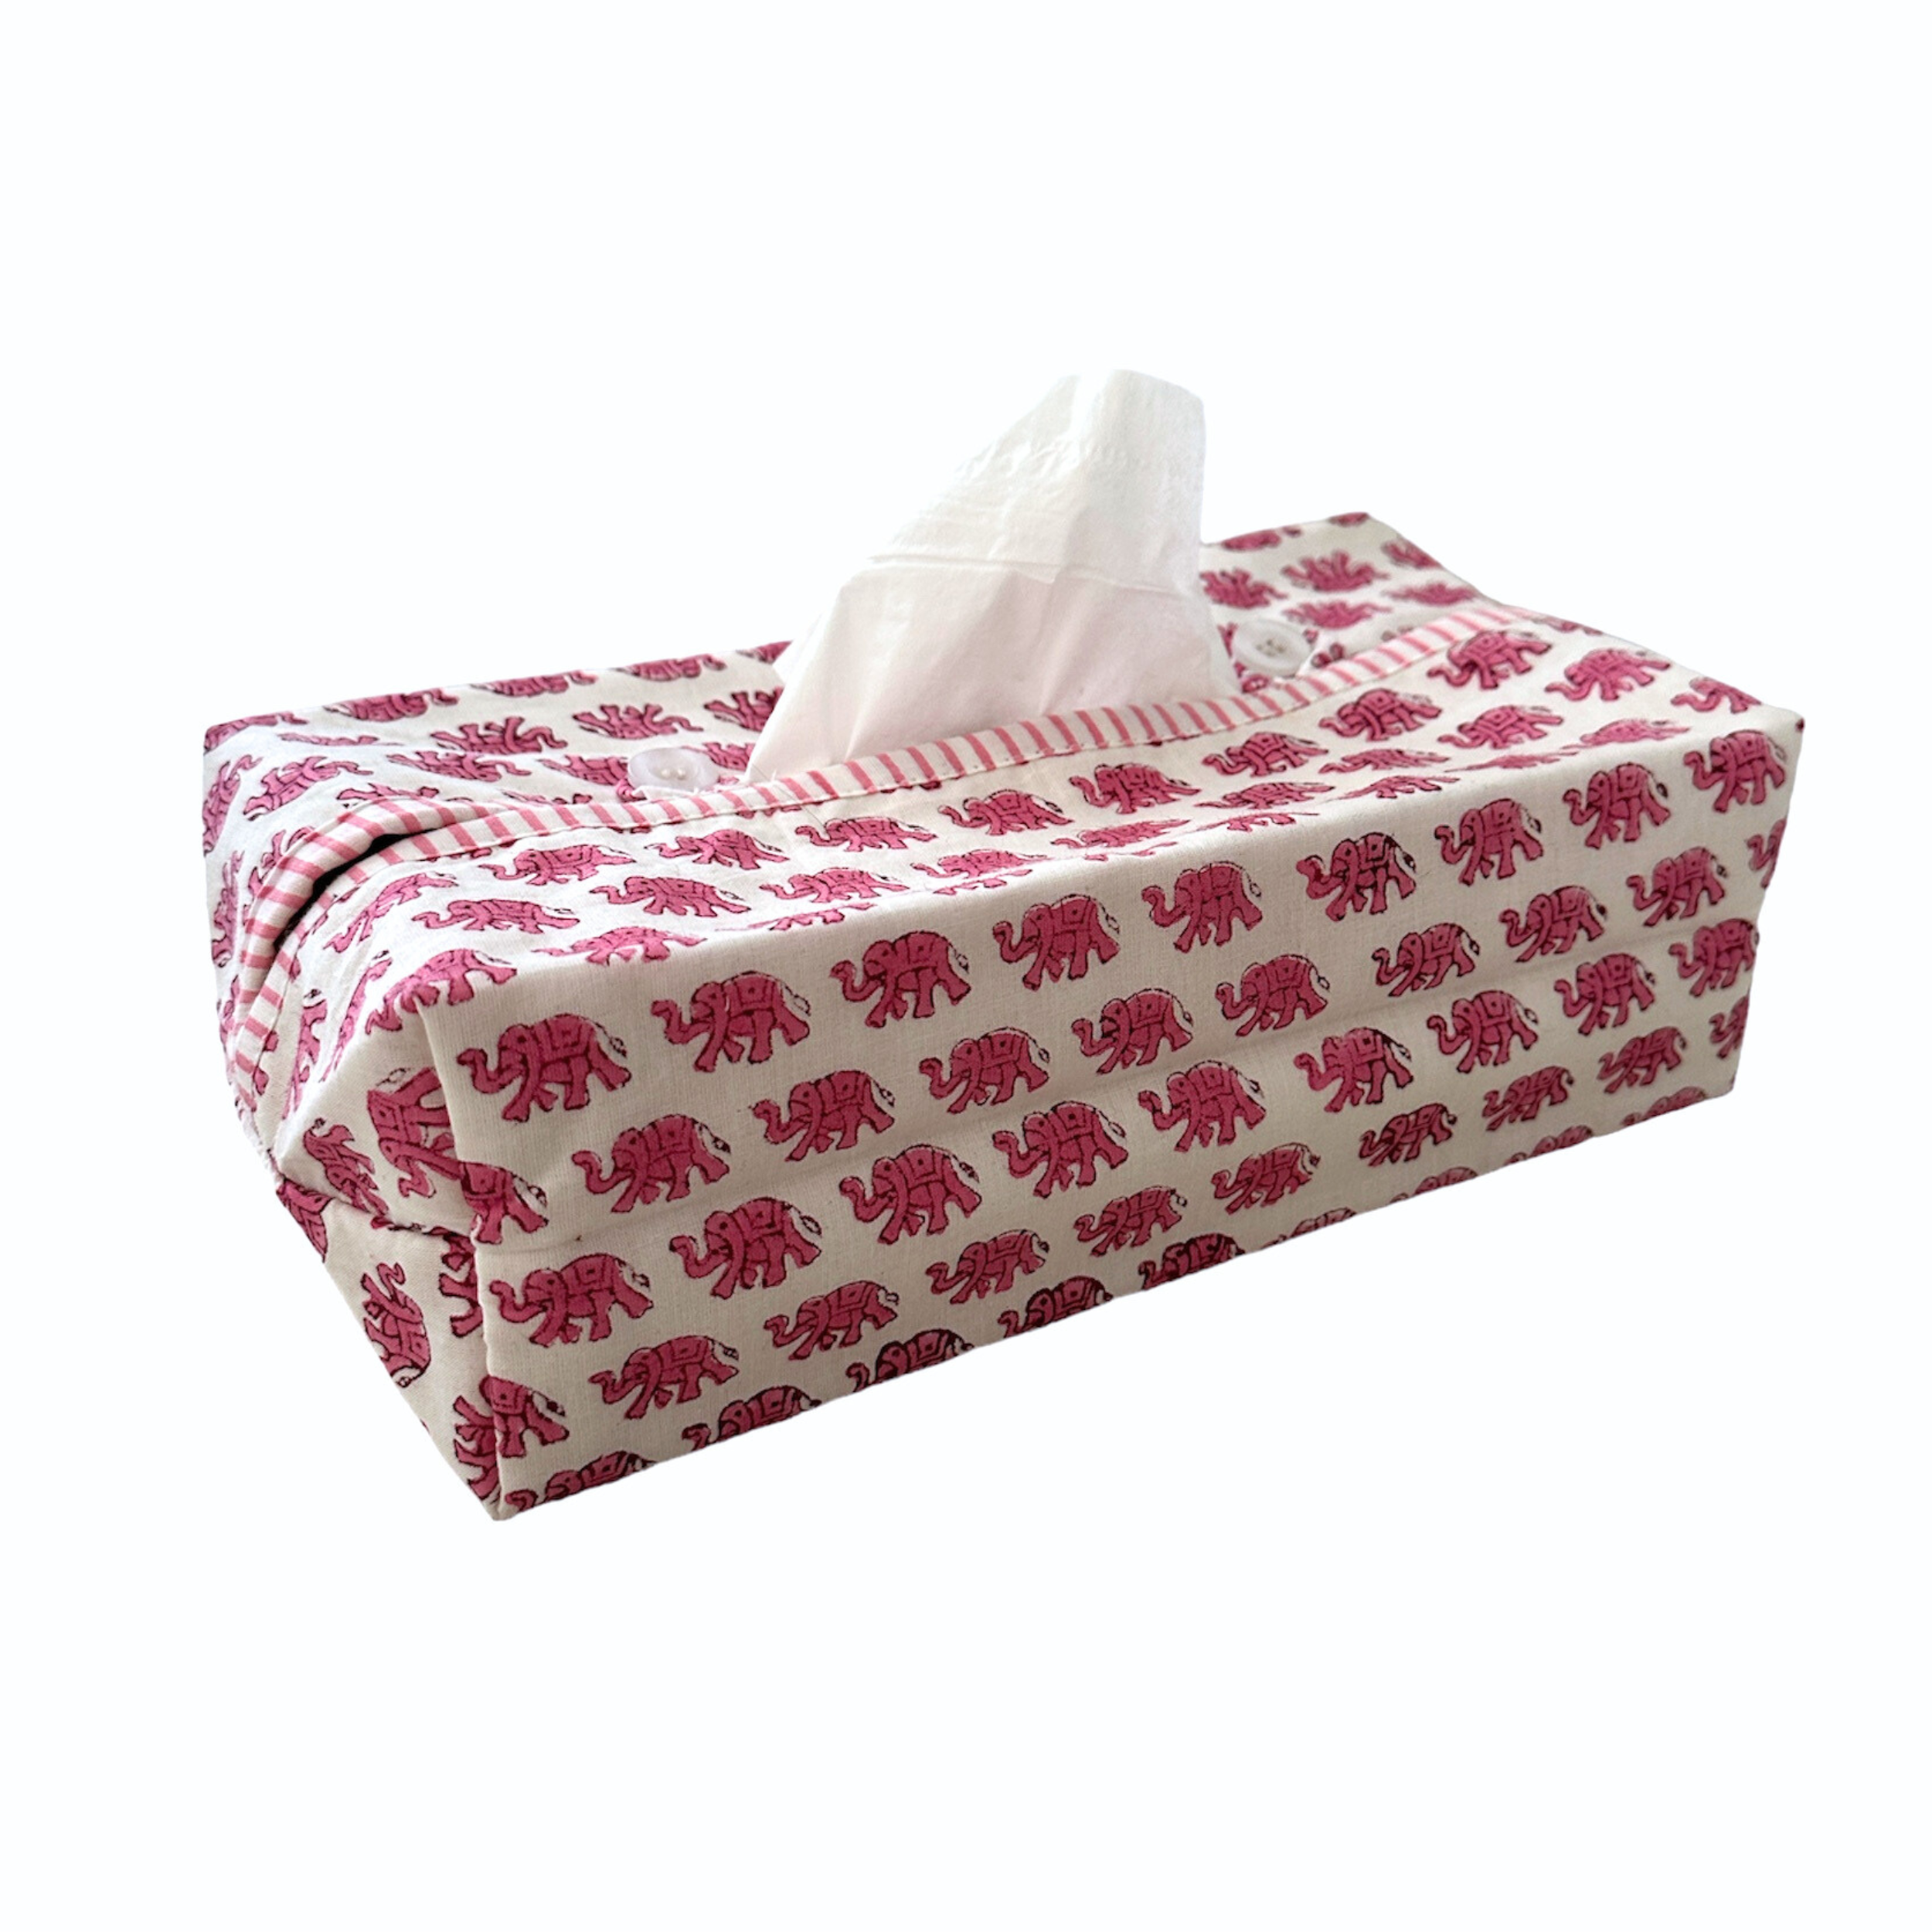 Pink Elephant Fabric Tissue Box Cover